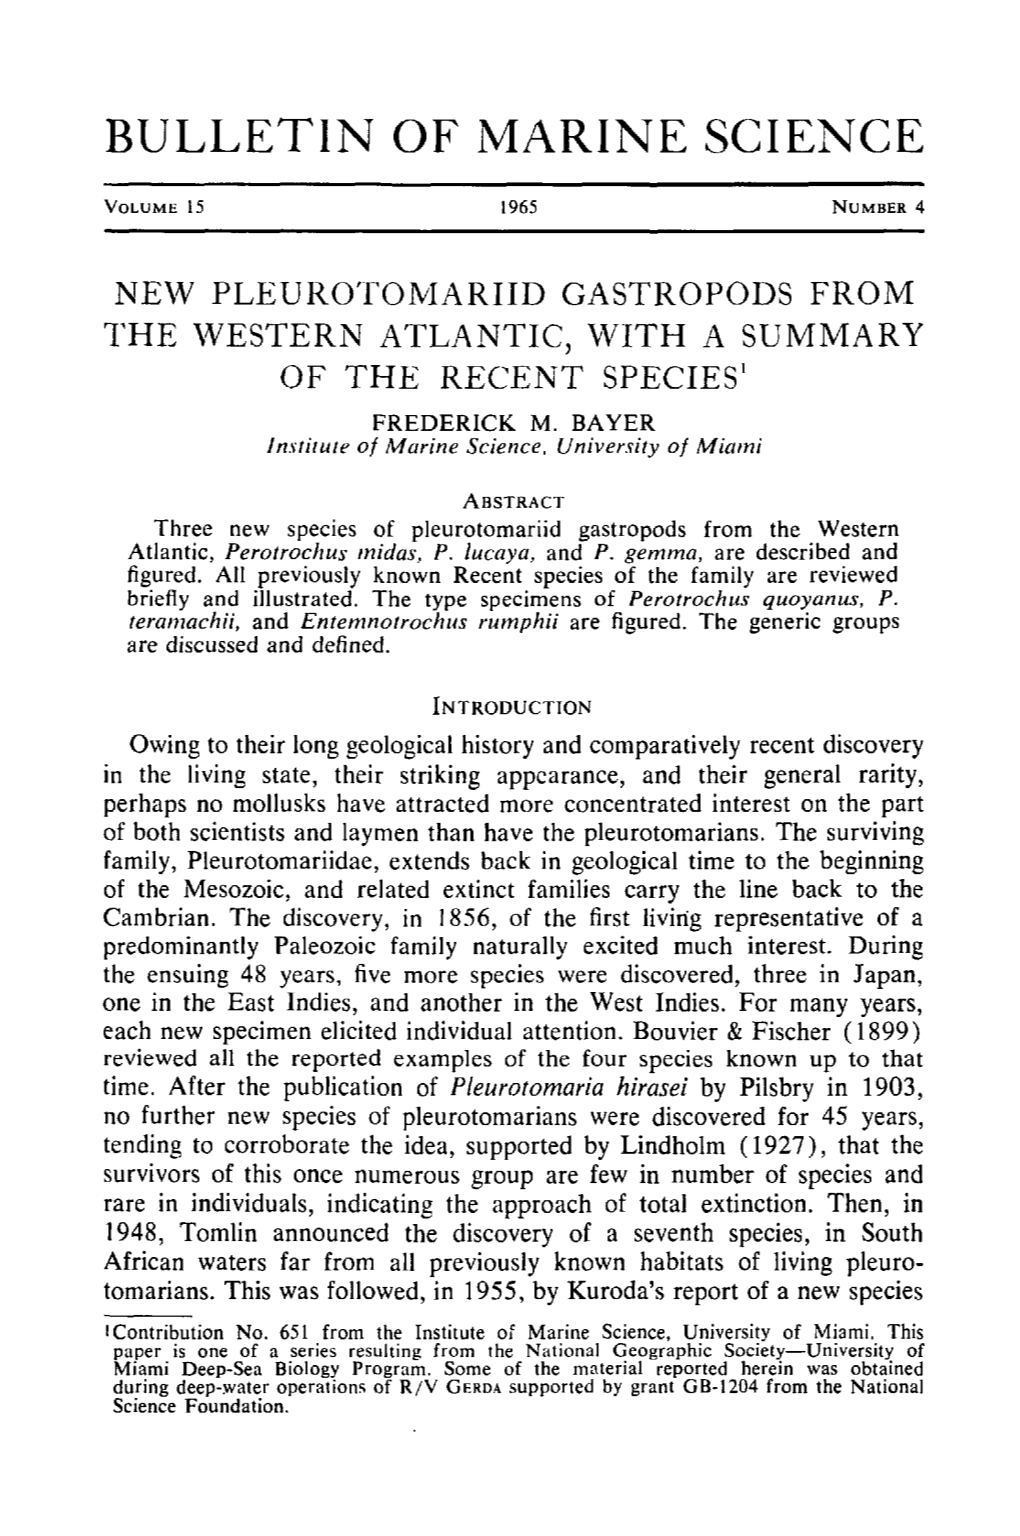 New Pleurotomariid Gastropods from the Western Atlantic, with A